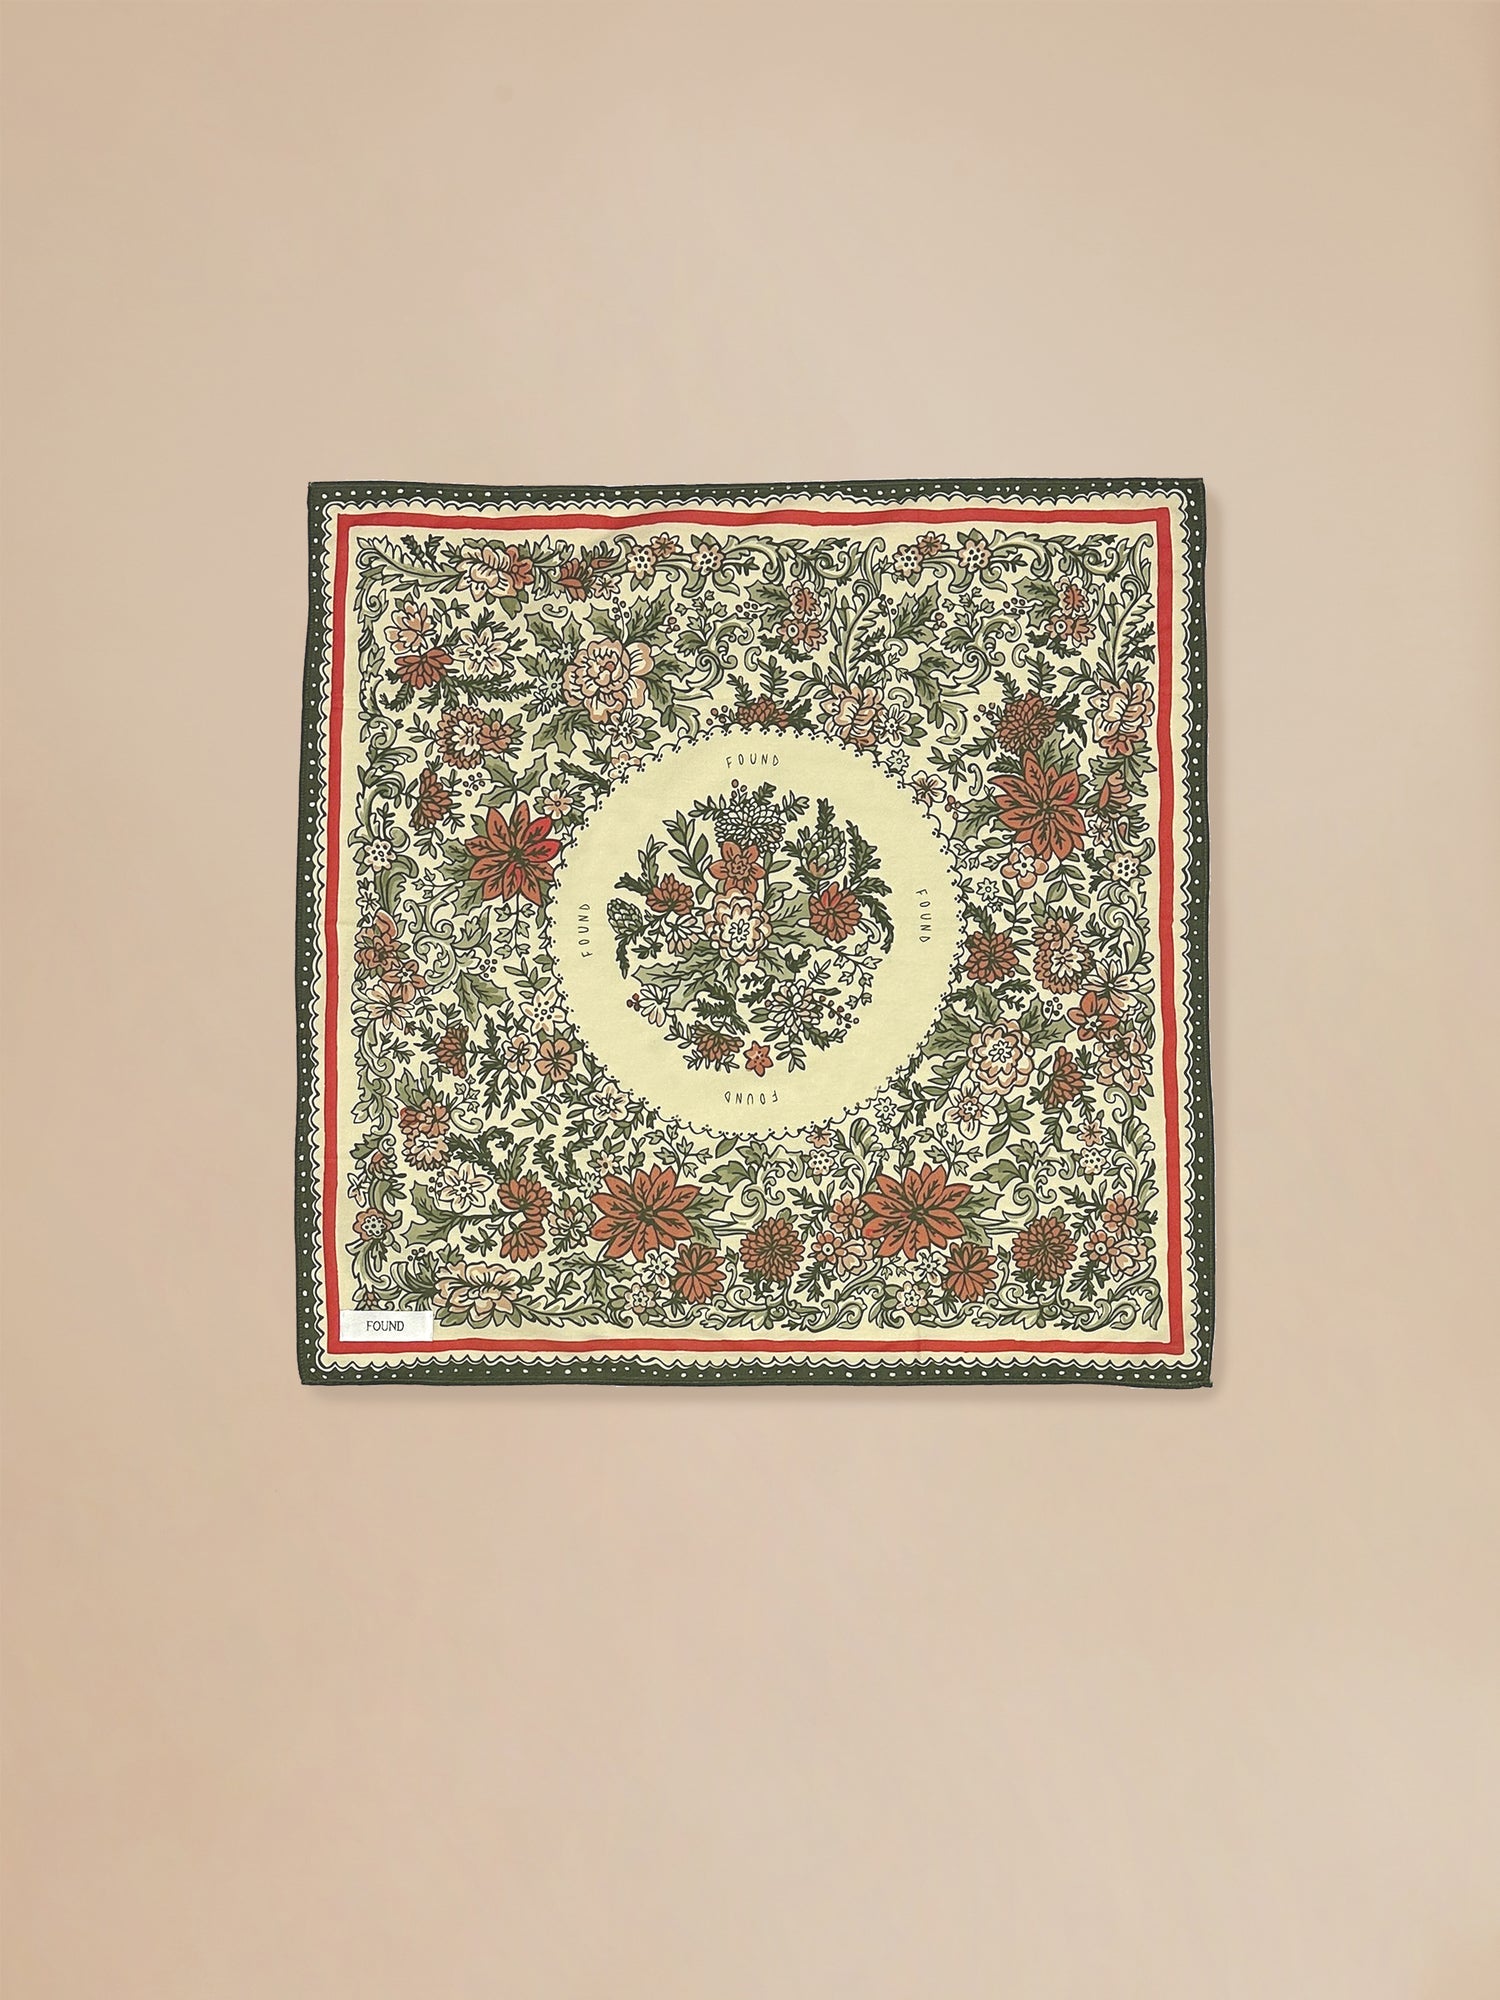 A square Floral Garden Bandana by Found with a floral design.